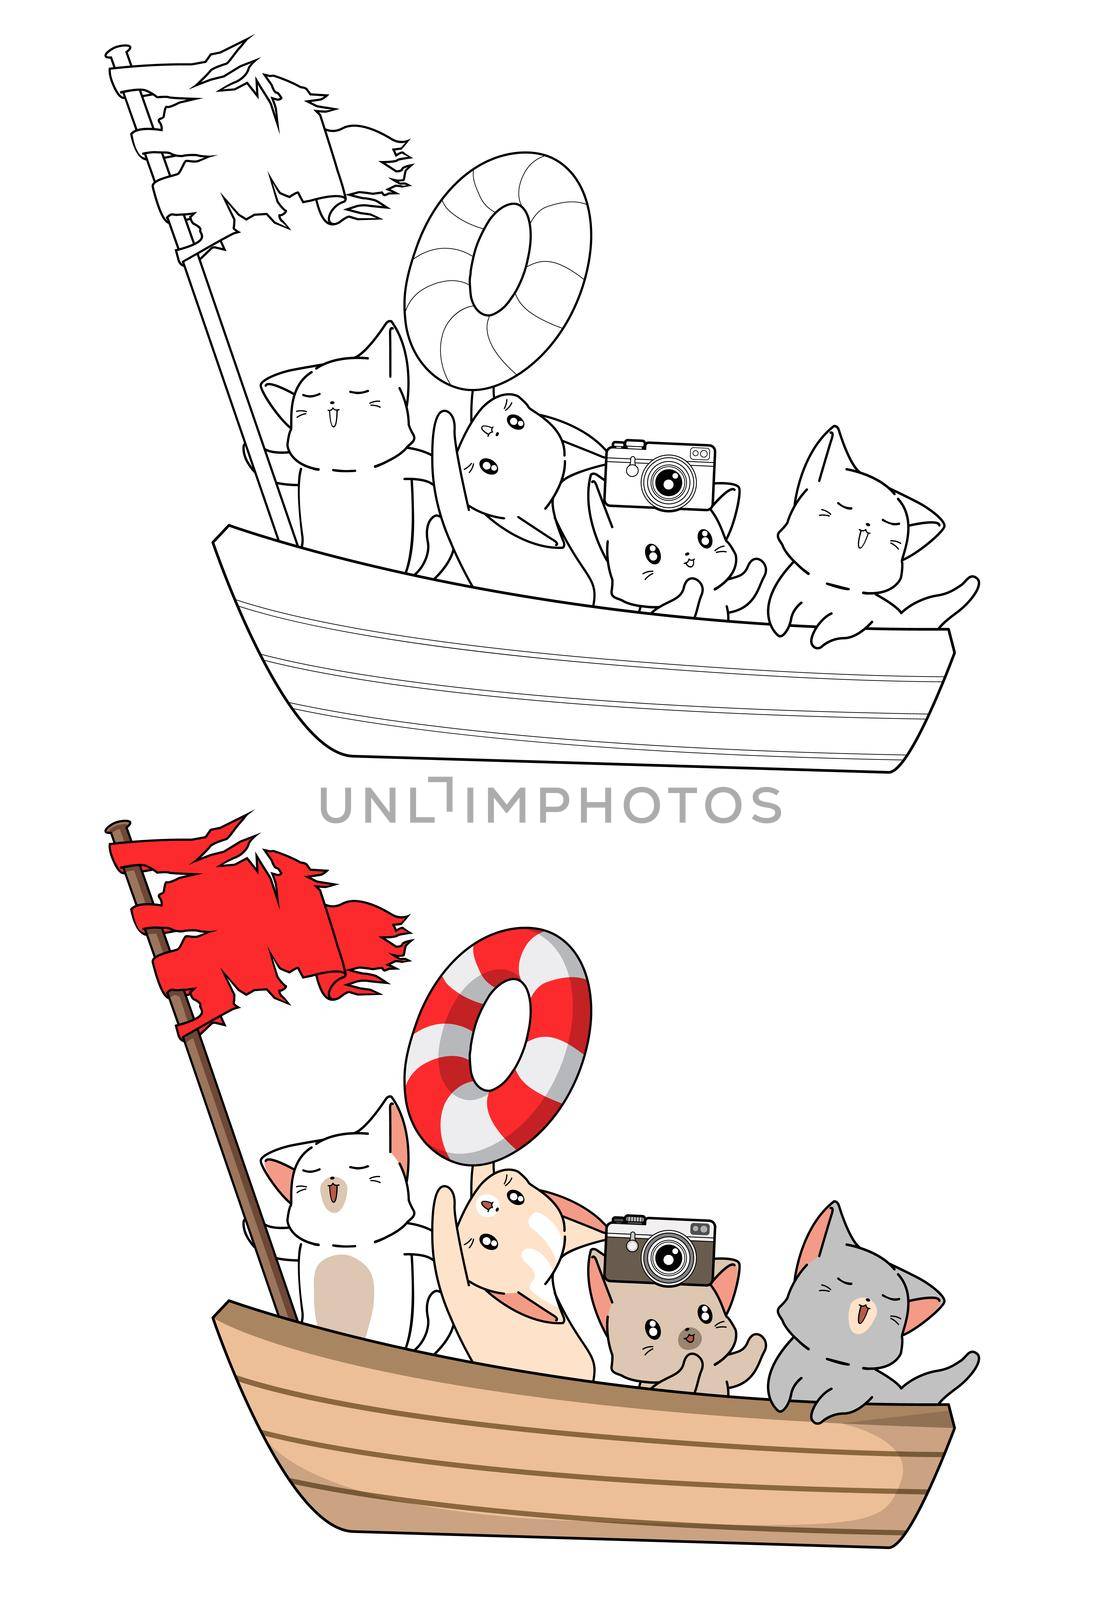 Cute cats in the boat are going to travel cartoon coloring page by valueinvestor